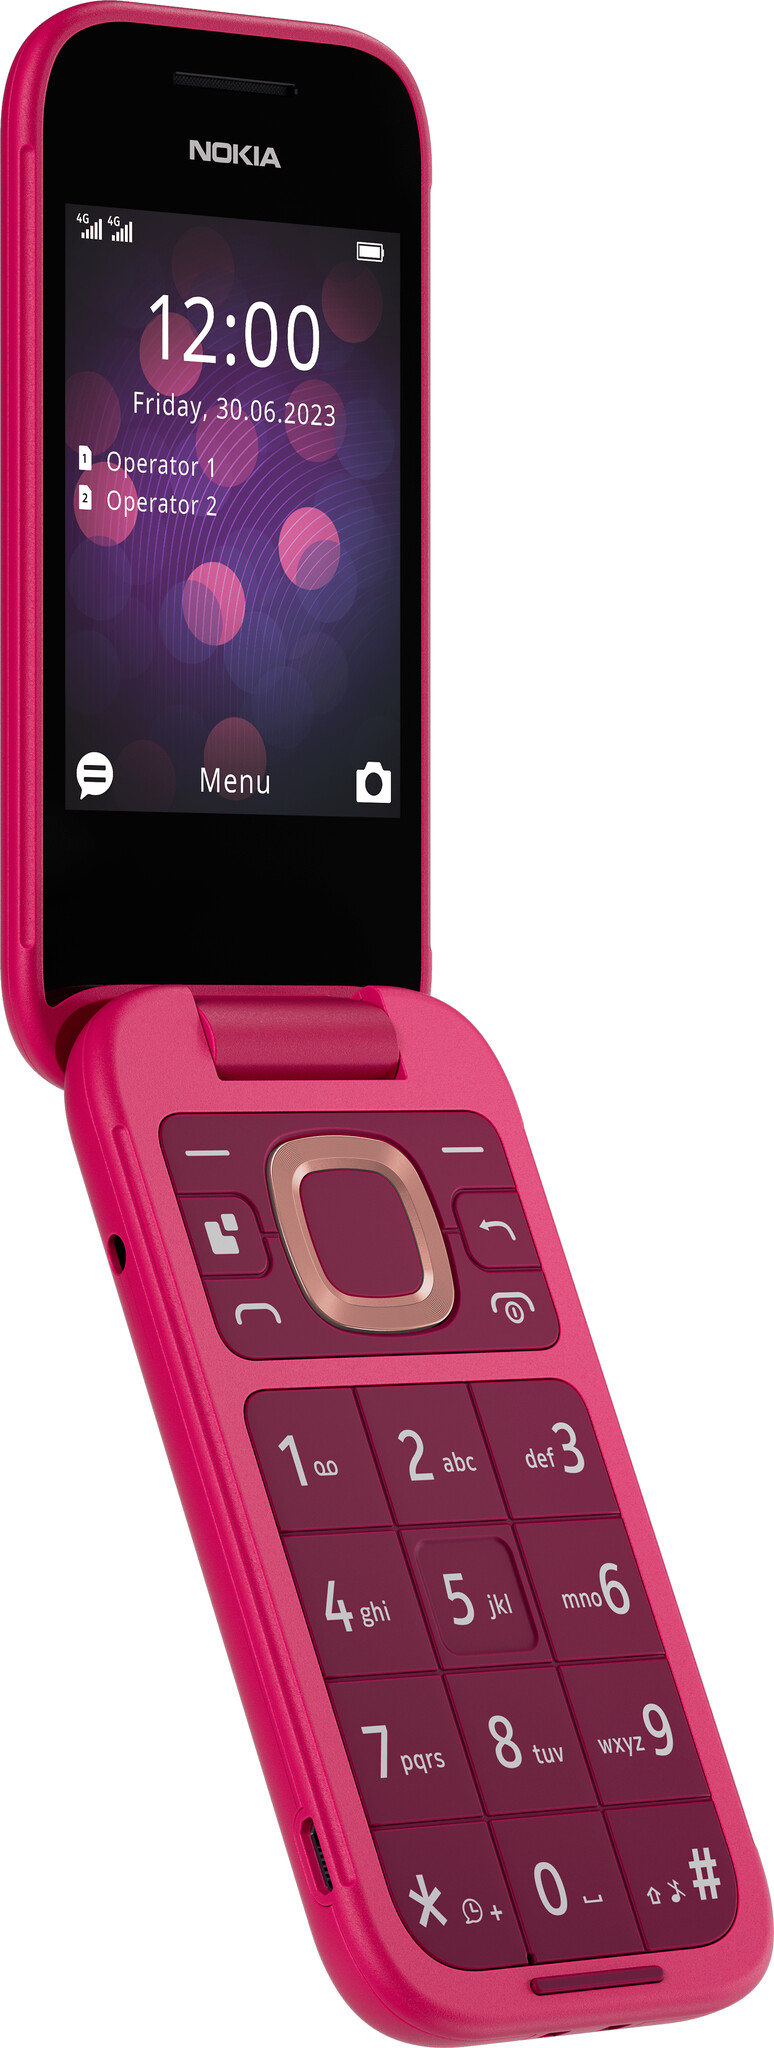 Nokia 2660 32GB Mobile Phone in Pop Pink (1GF011IPC1A04) #364121